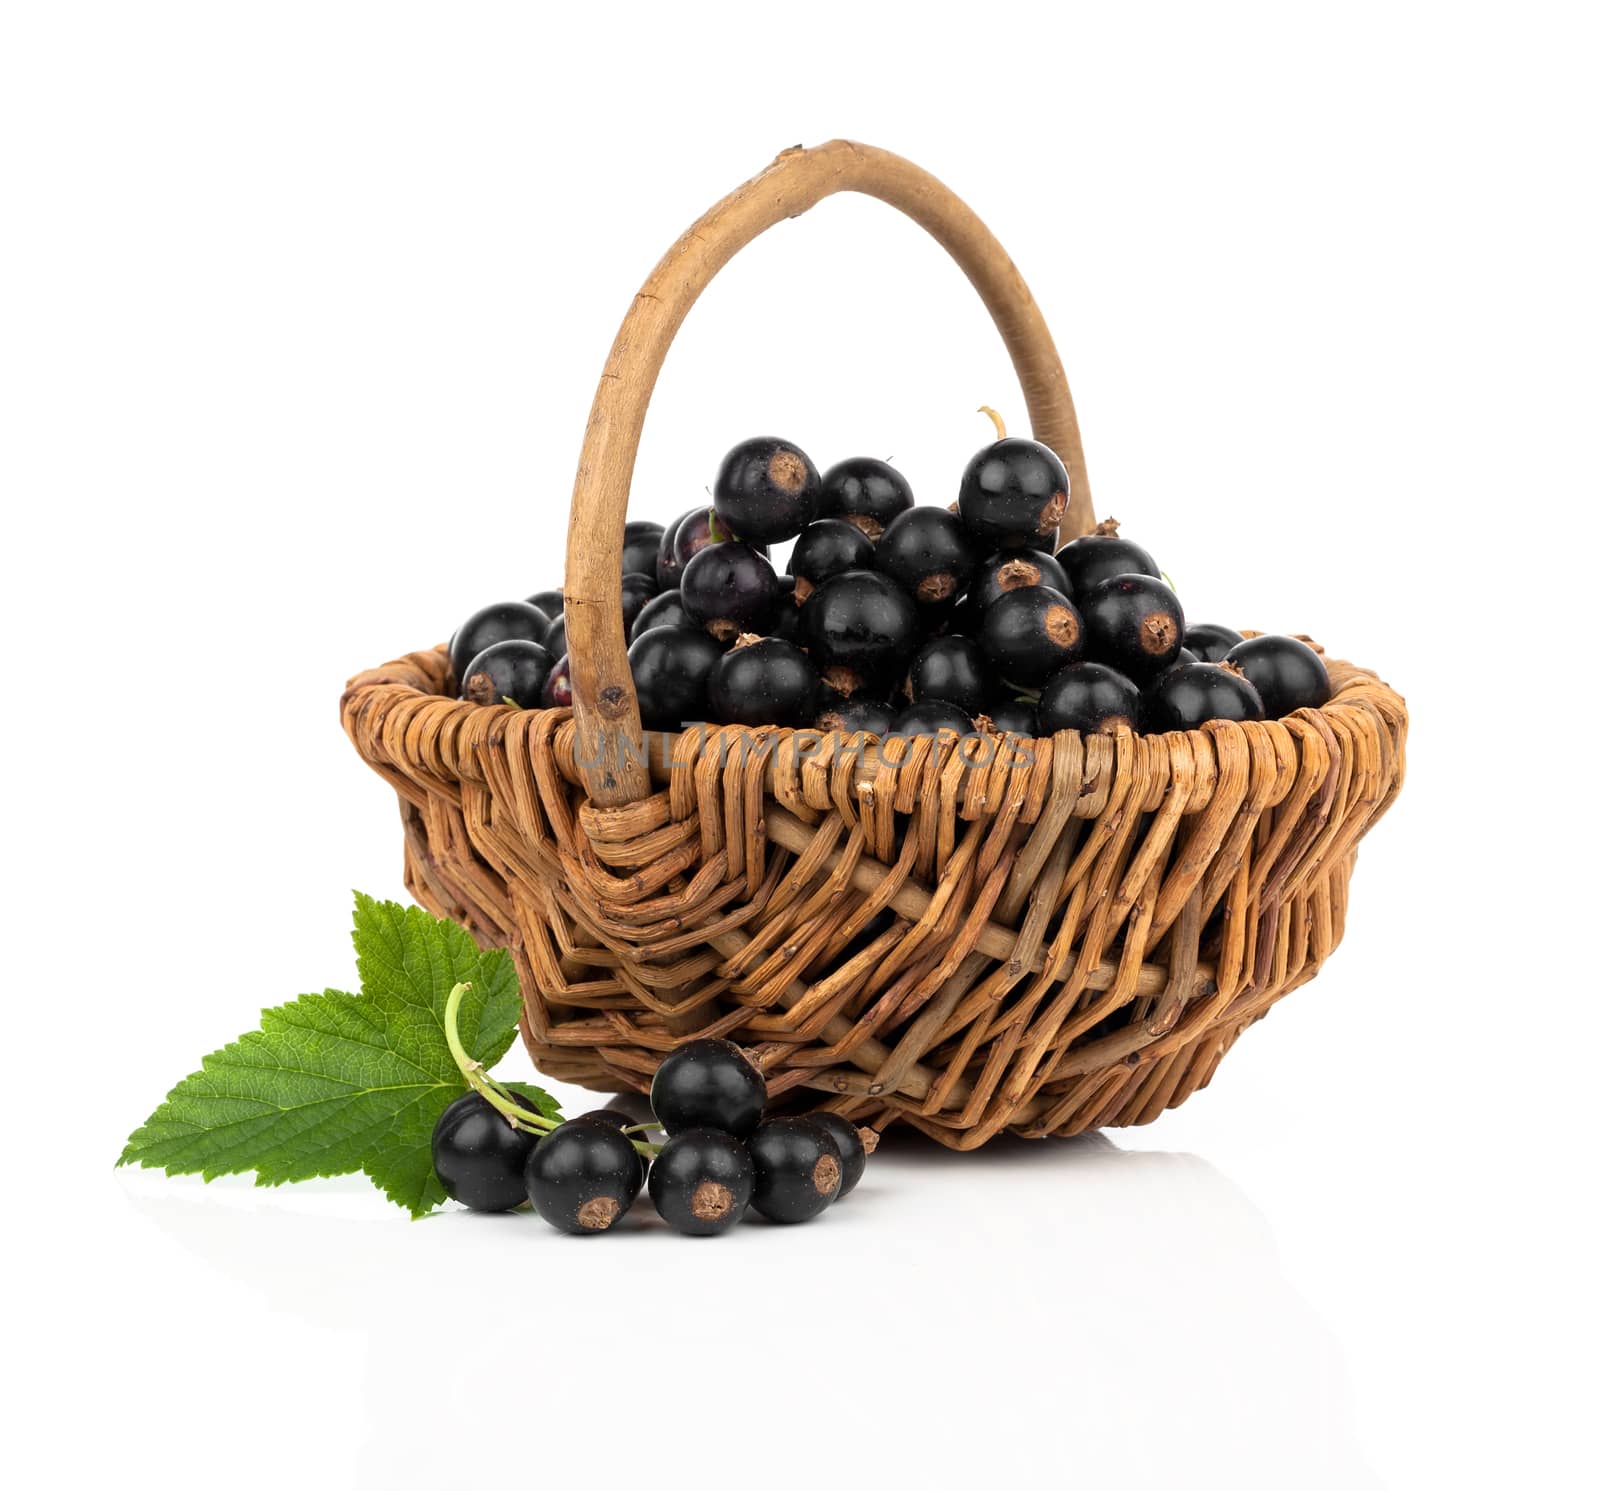 black currant in a wicker basket, on a white background